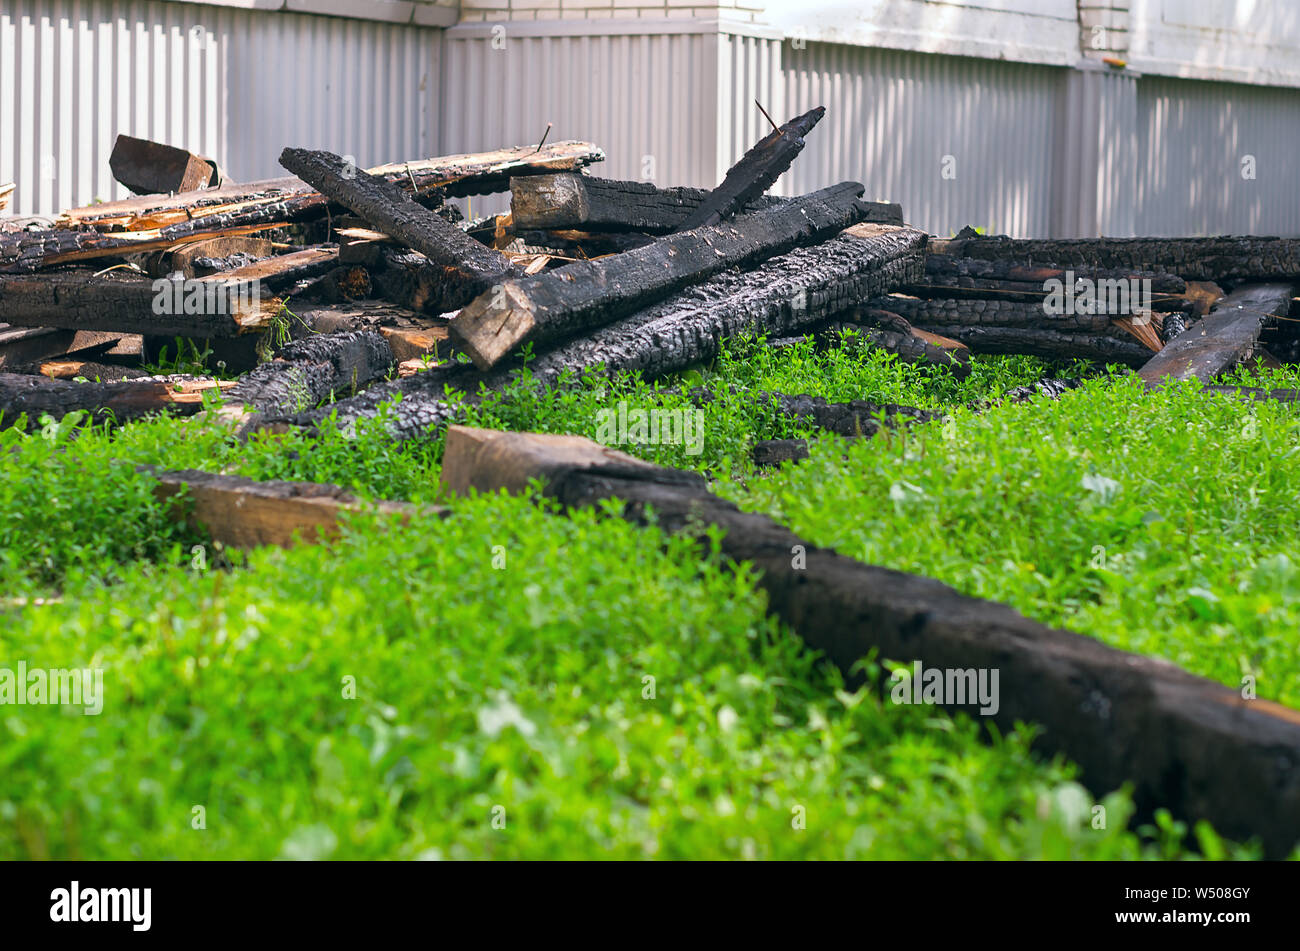 The Black Charred Rafters, Roof Framework, Nails Sticking Out Dumped on the Lawn near the Apartment Building After the Fire. Insurance Concept. Stock Photo